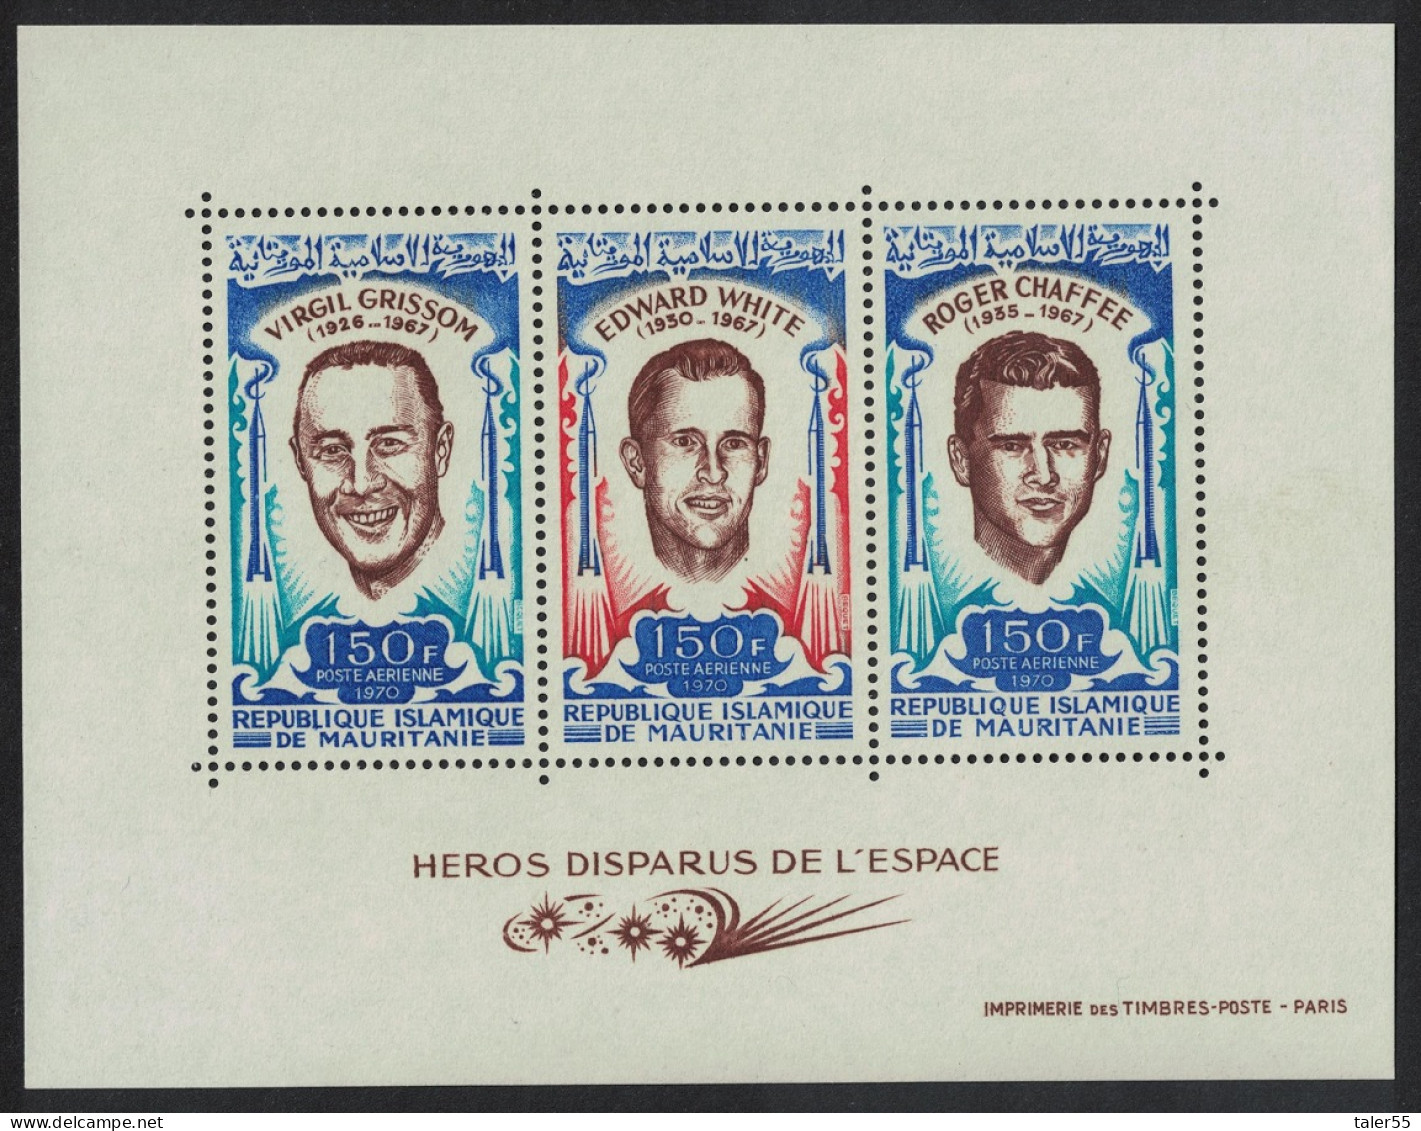 Mauritania Grissom White Lost Heroes Of Space MS 1970 MNH SG#MS379 Sc#C103a - Mauritania (1960-...)